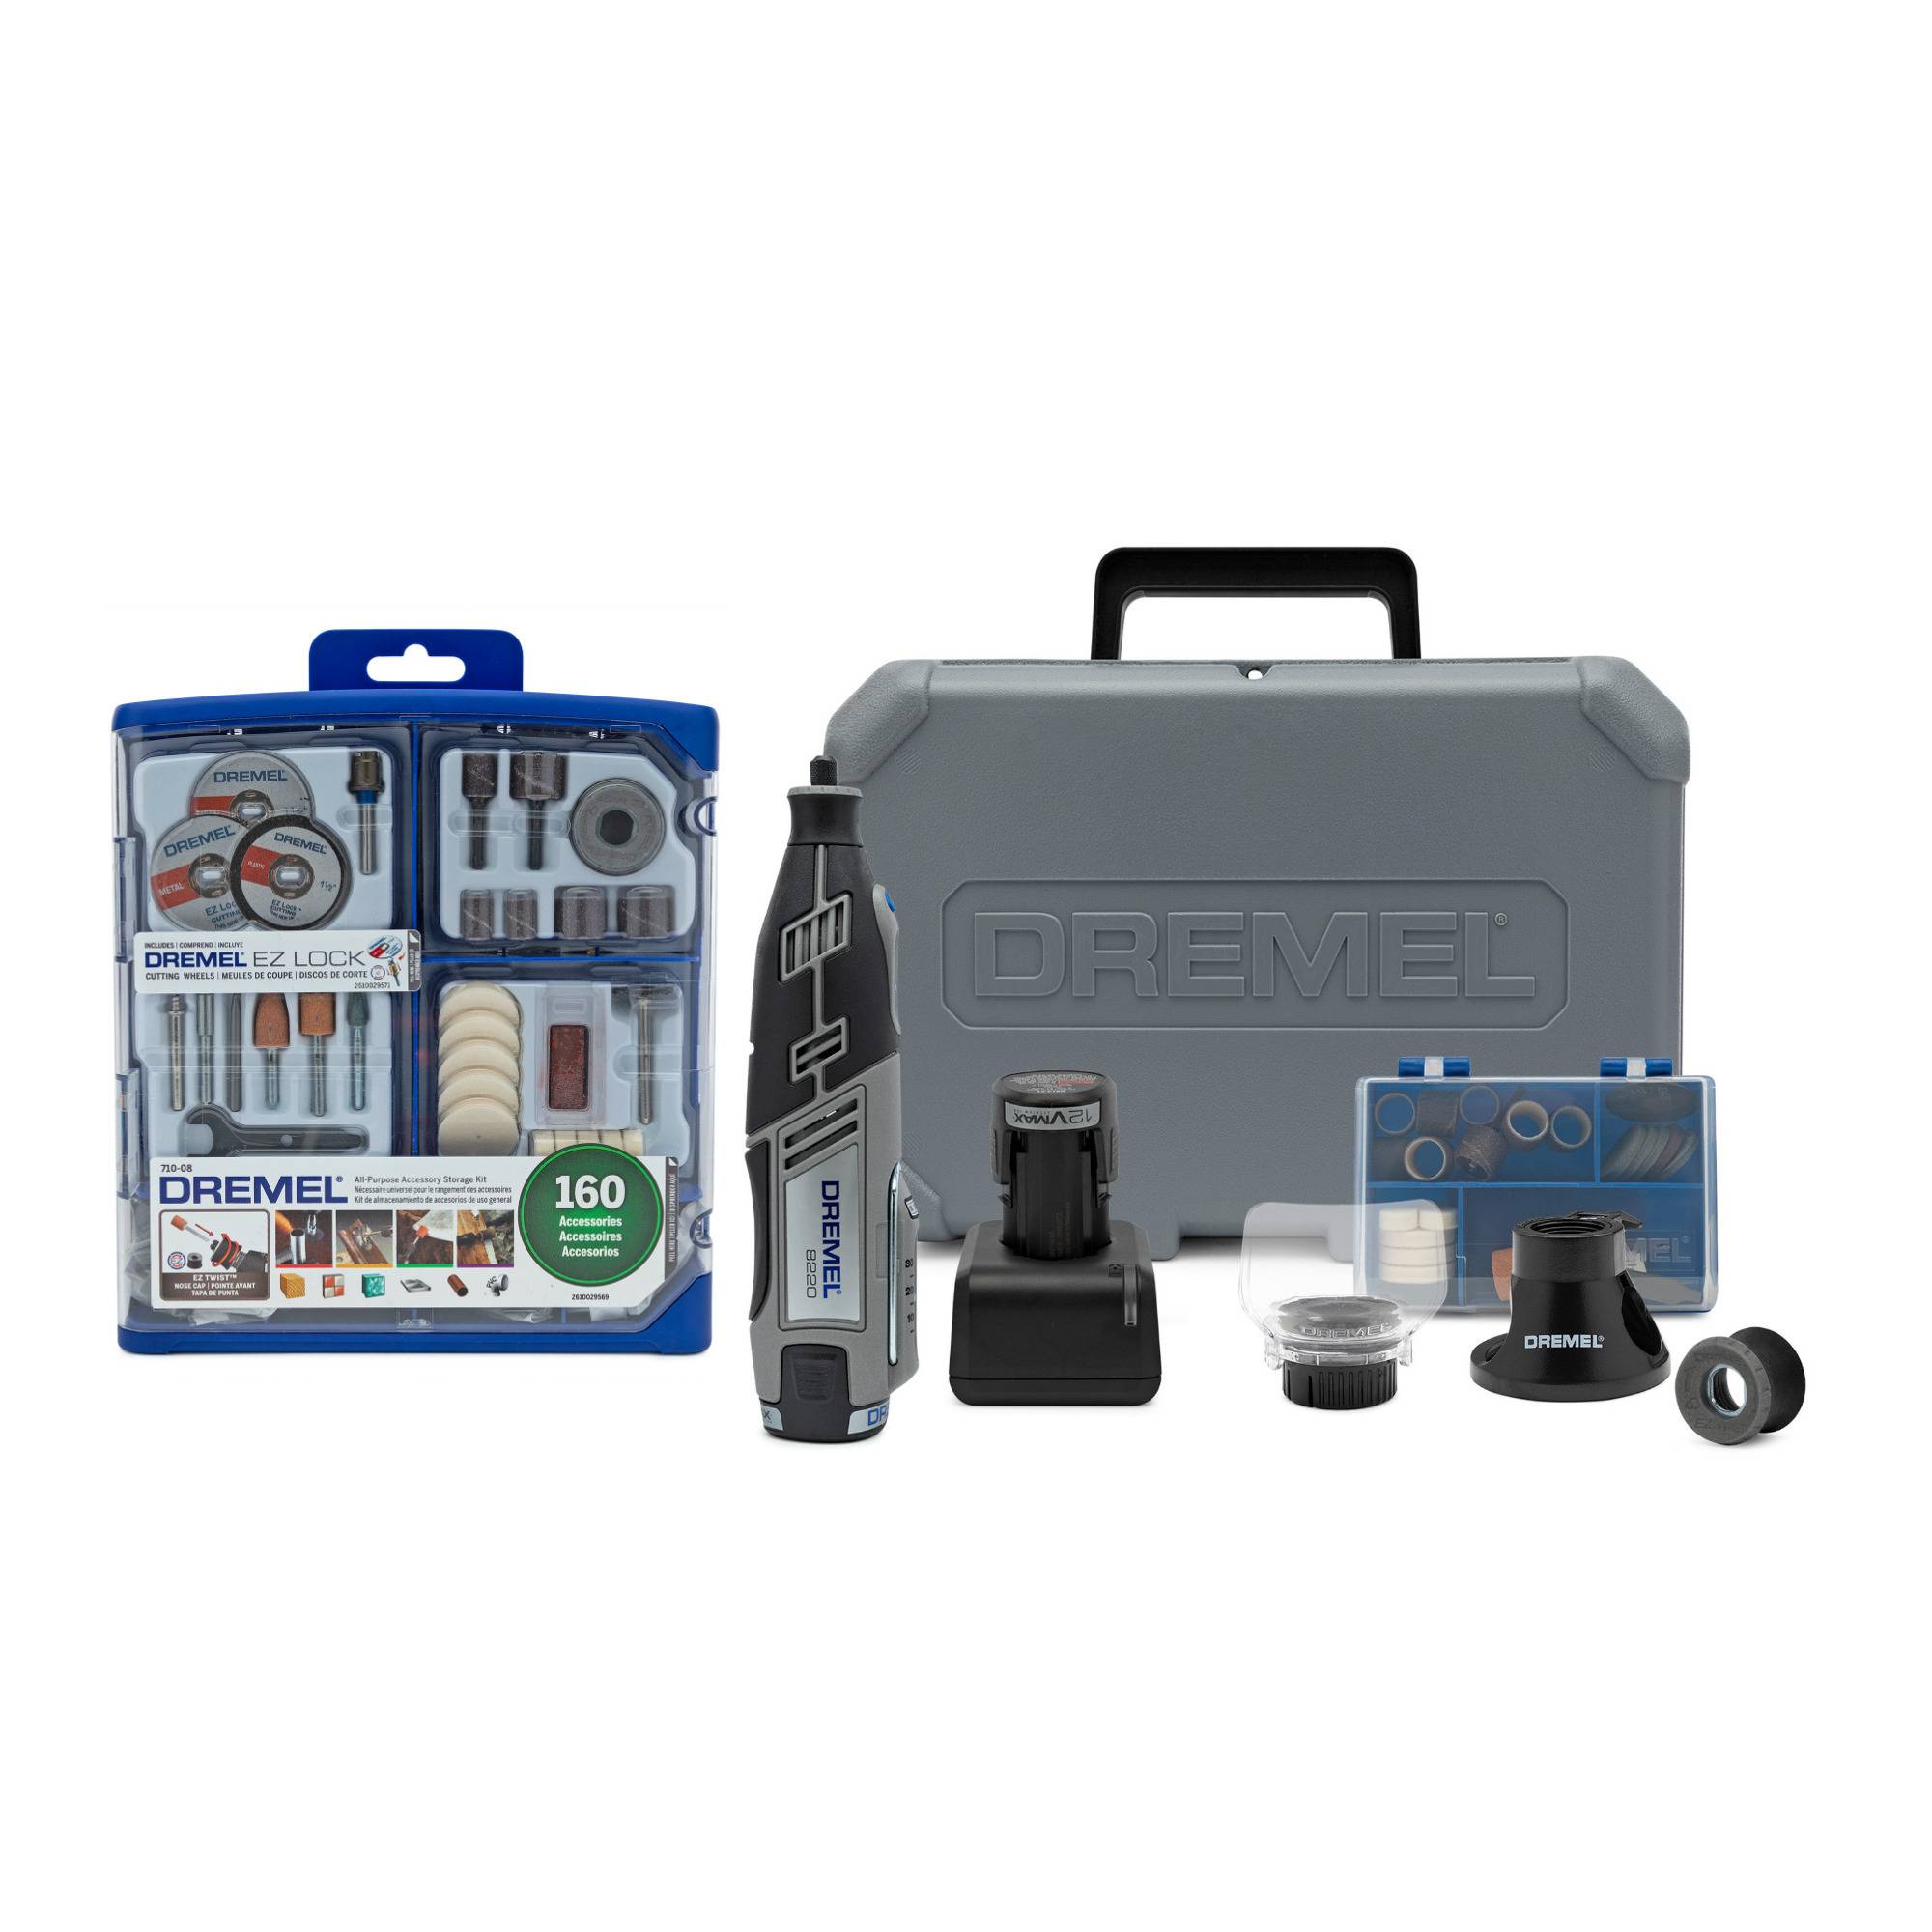 Dremel 8220-2/28 12VMax High-Performance Cordless Rotary Tool Kit with Rotary Accessory Bundle